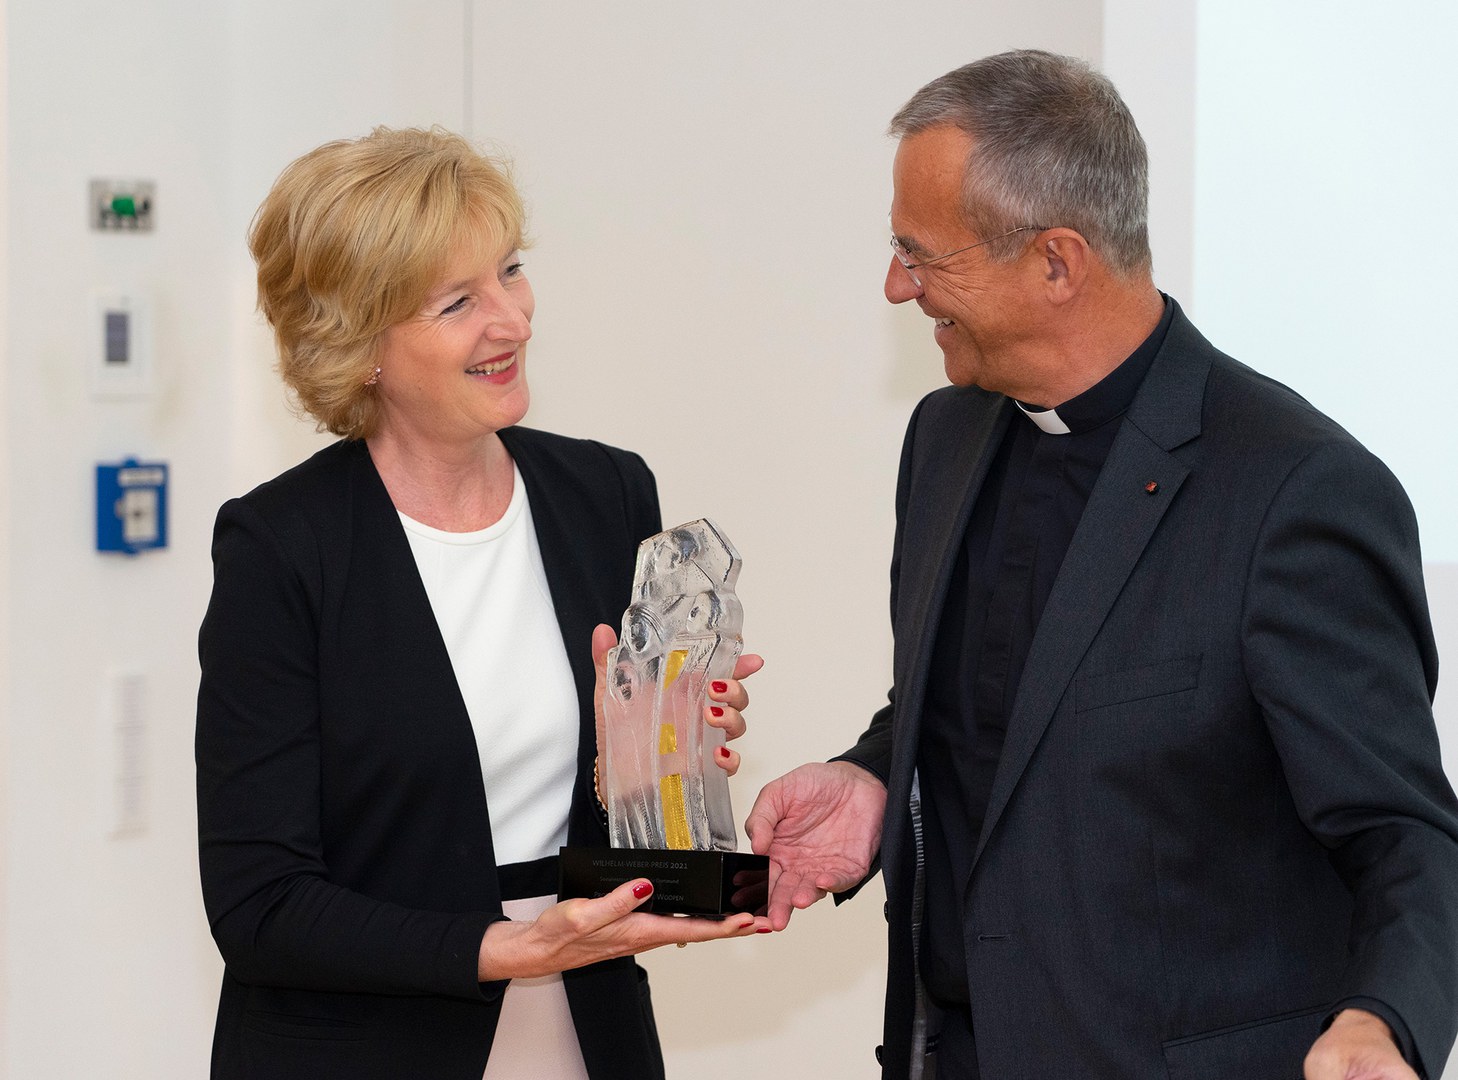 Prof. Dr. Christiane Woopen received the Wilhelm Weber Prize  for special achievements in the spirit of Catholic social ethics in the Kommende Dortmund. Prof. Dr. Paul Kirchhof gave the laudatory speech for the prize winner.